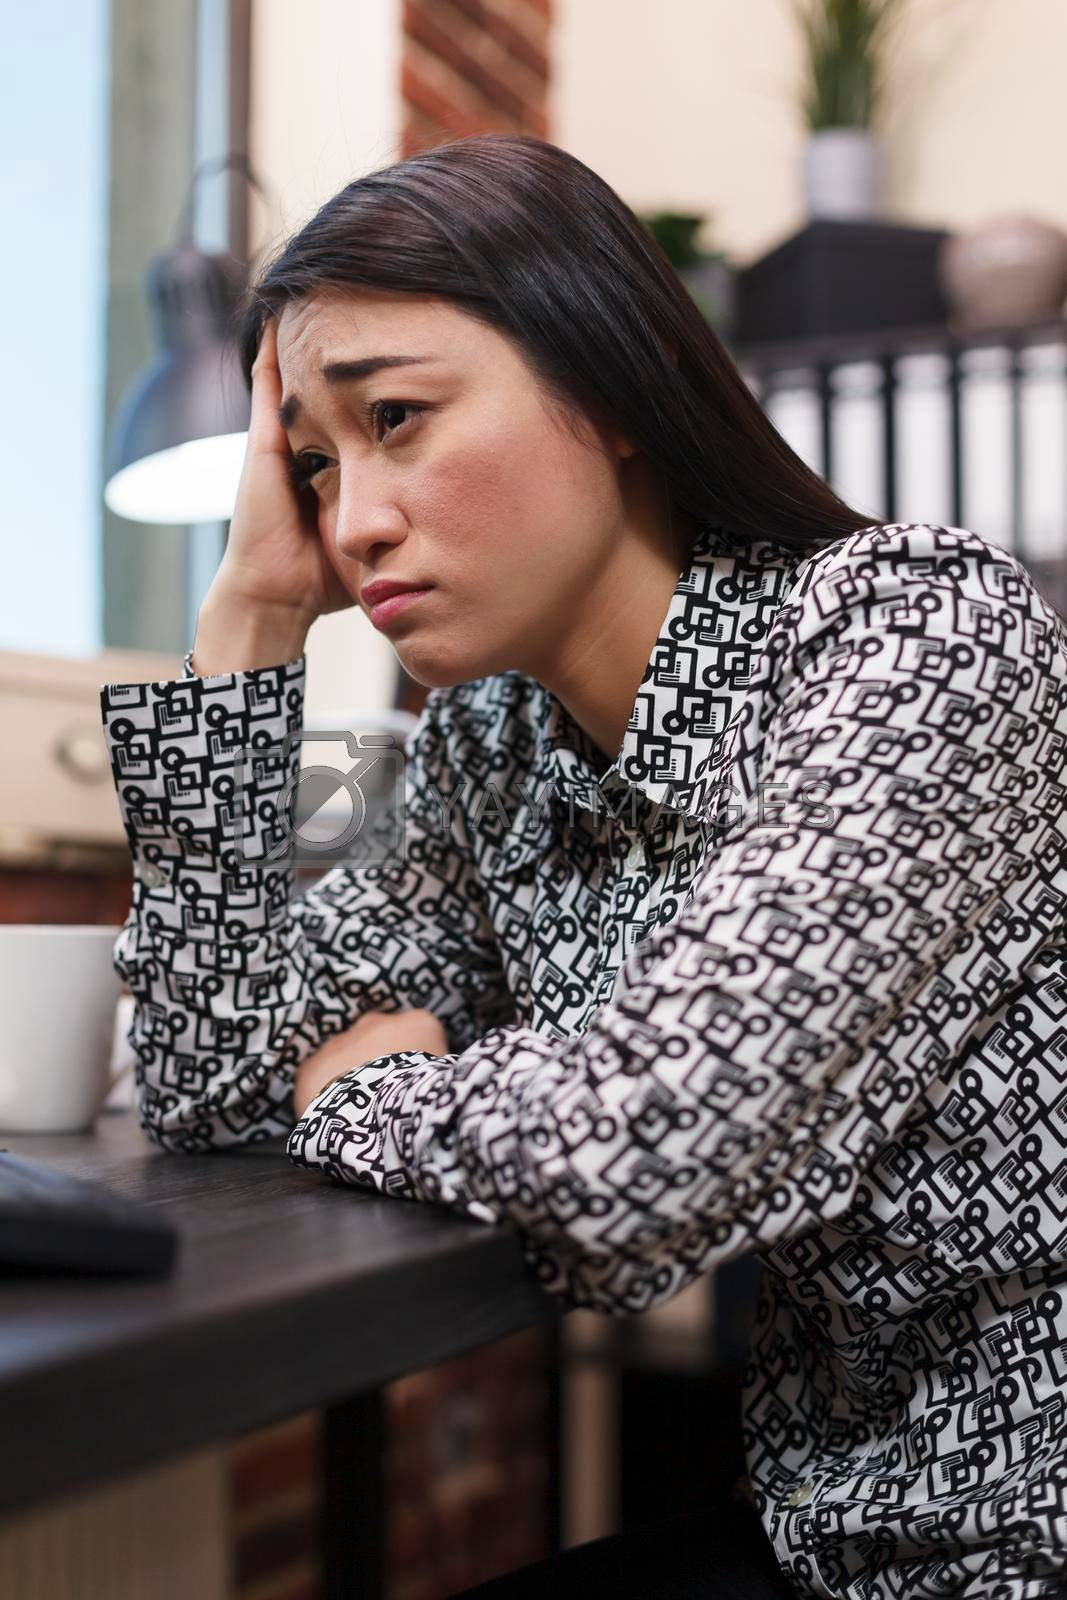 Marketing company frustrated worker stressed about business financial problems and poor management. Asian businesswoman worried about being fired while sitting at desk in financial office